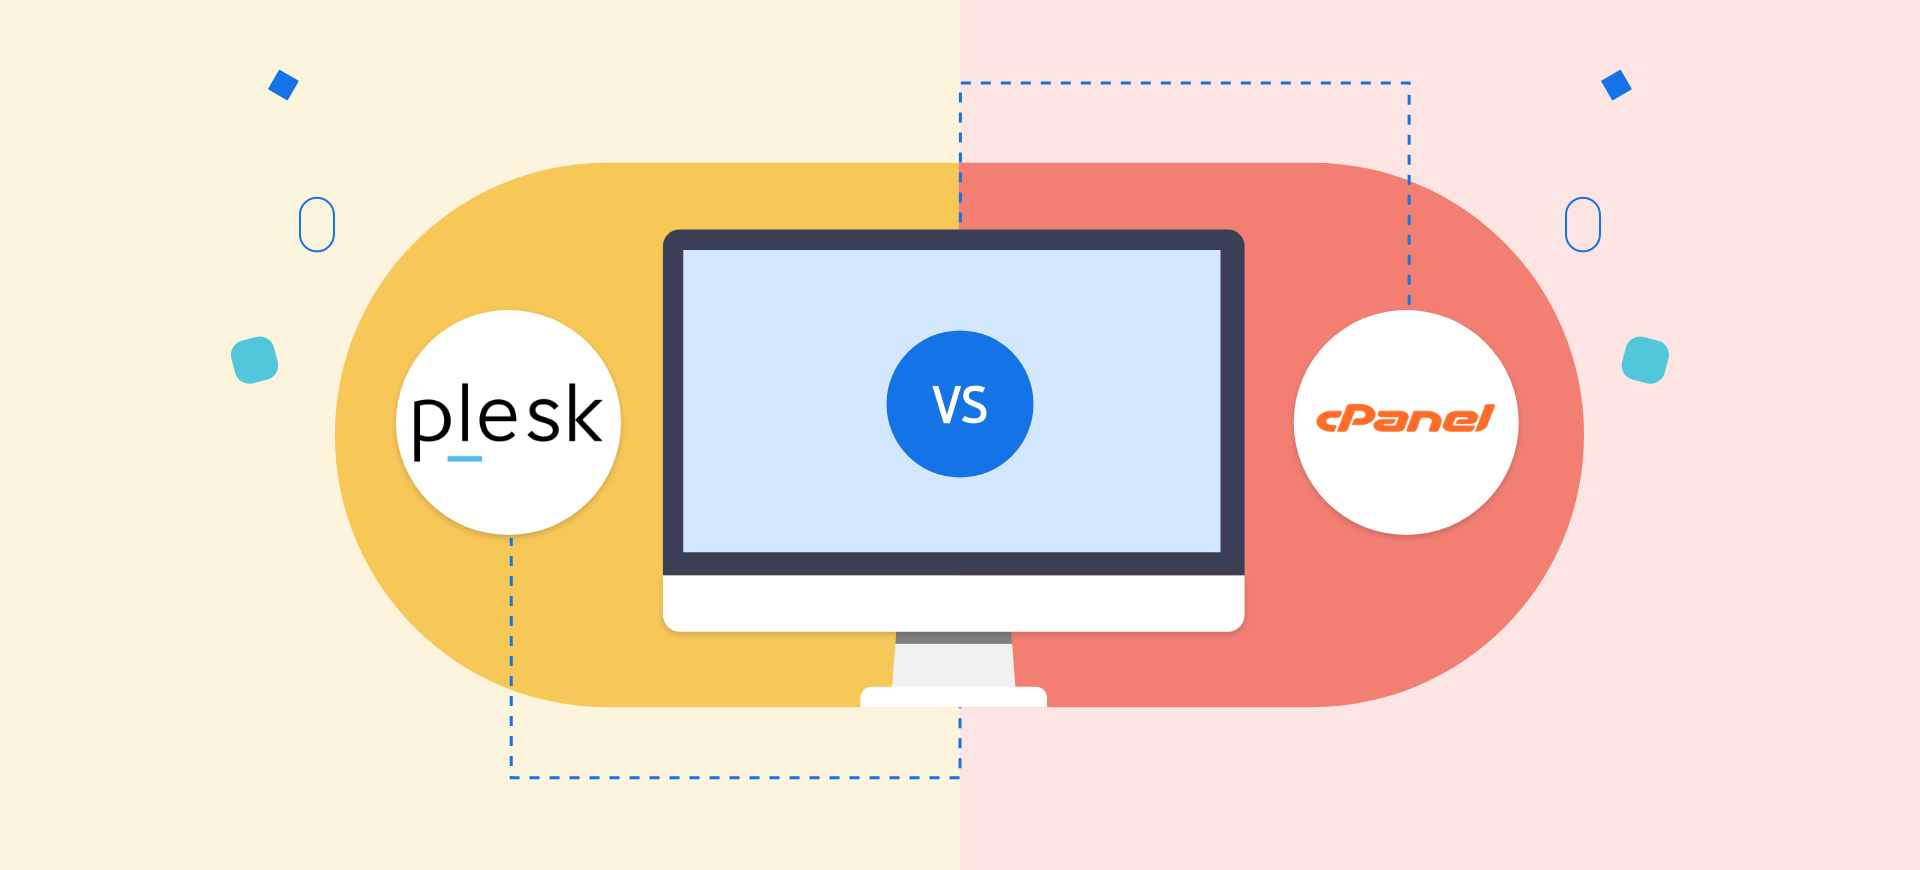 Plesk Vs cPanel: A Comparison of Web Hosting Control Panels | Fasthosts